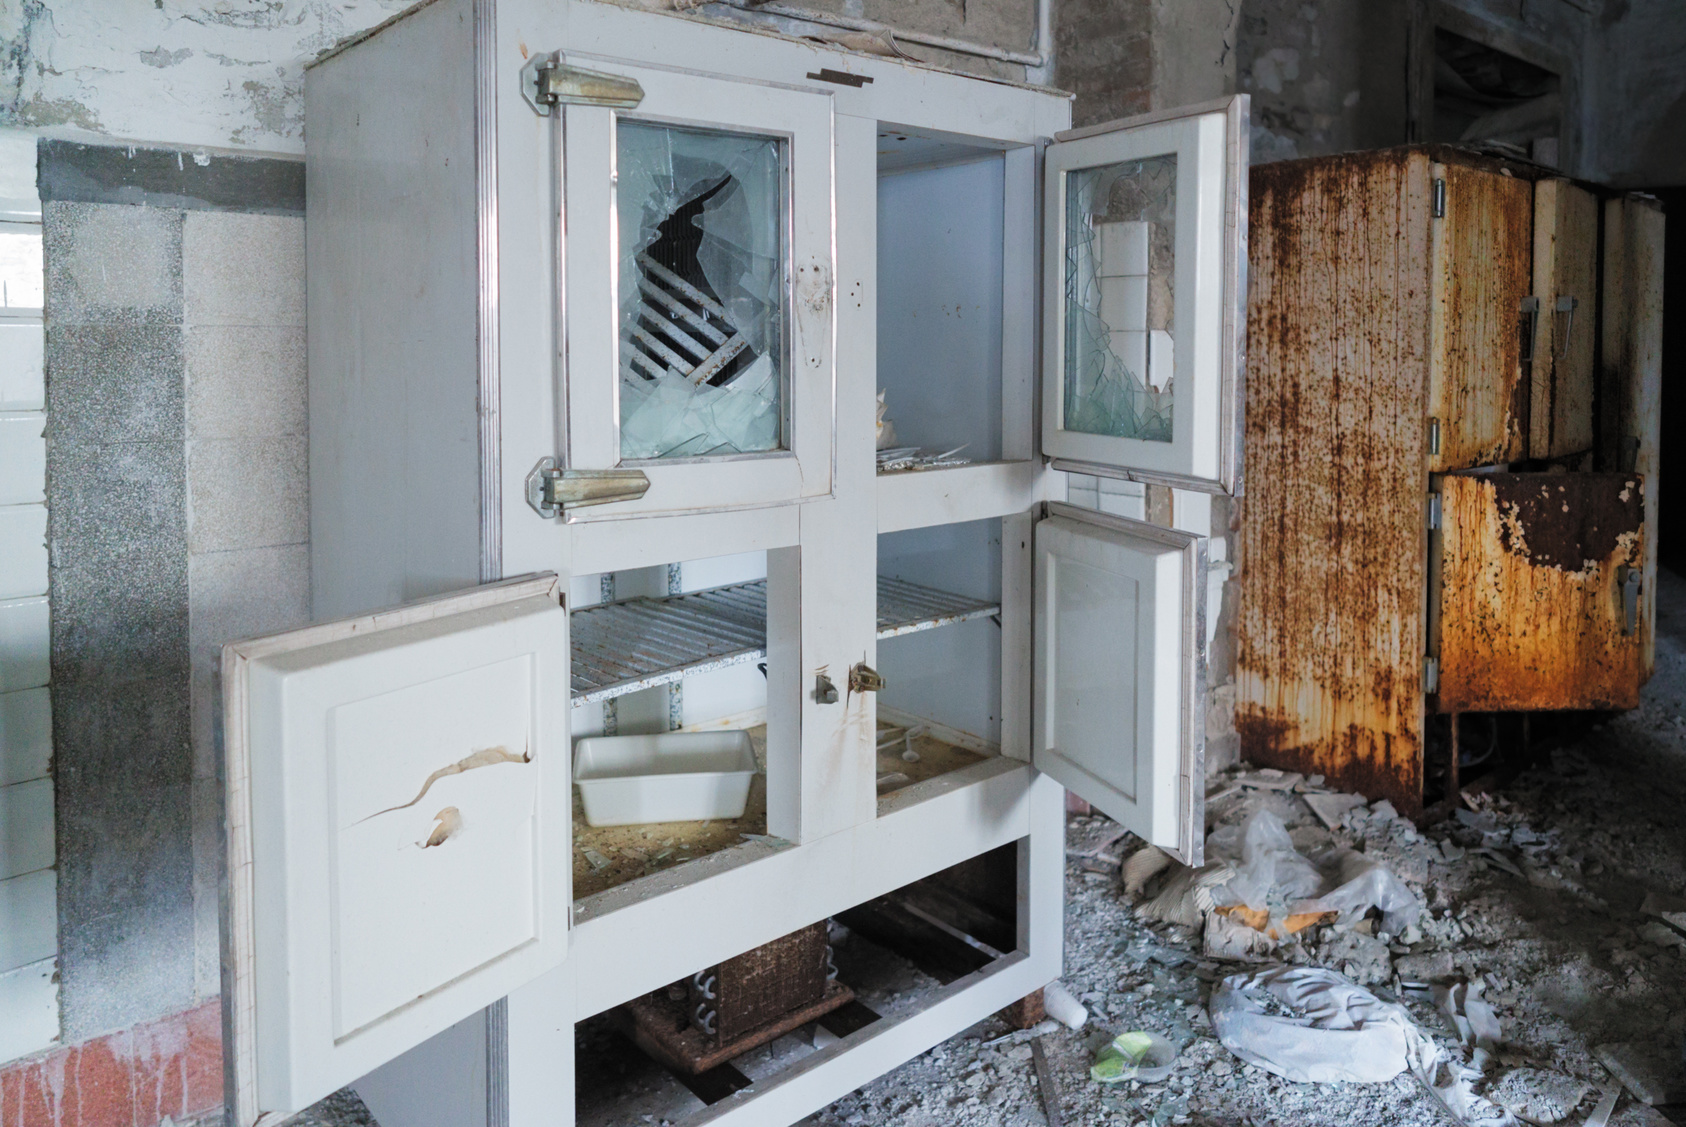 Cabinet-Fire-Damage-Soot